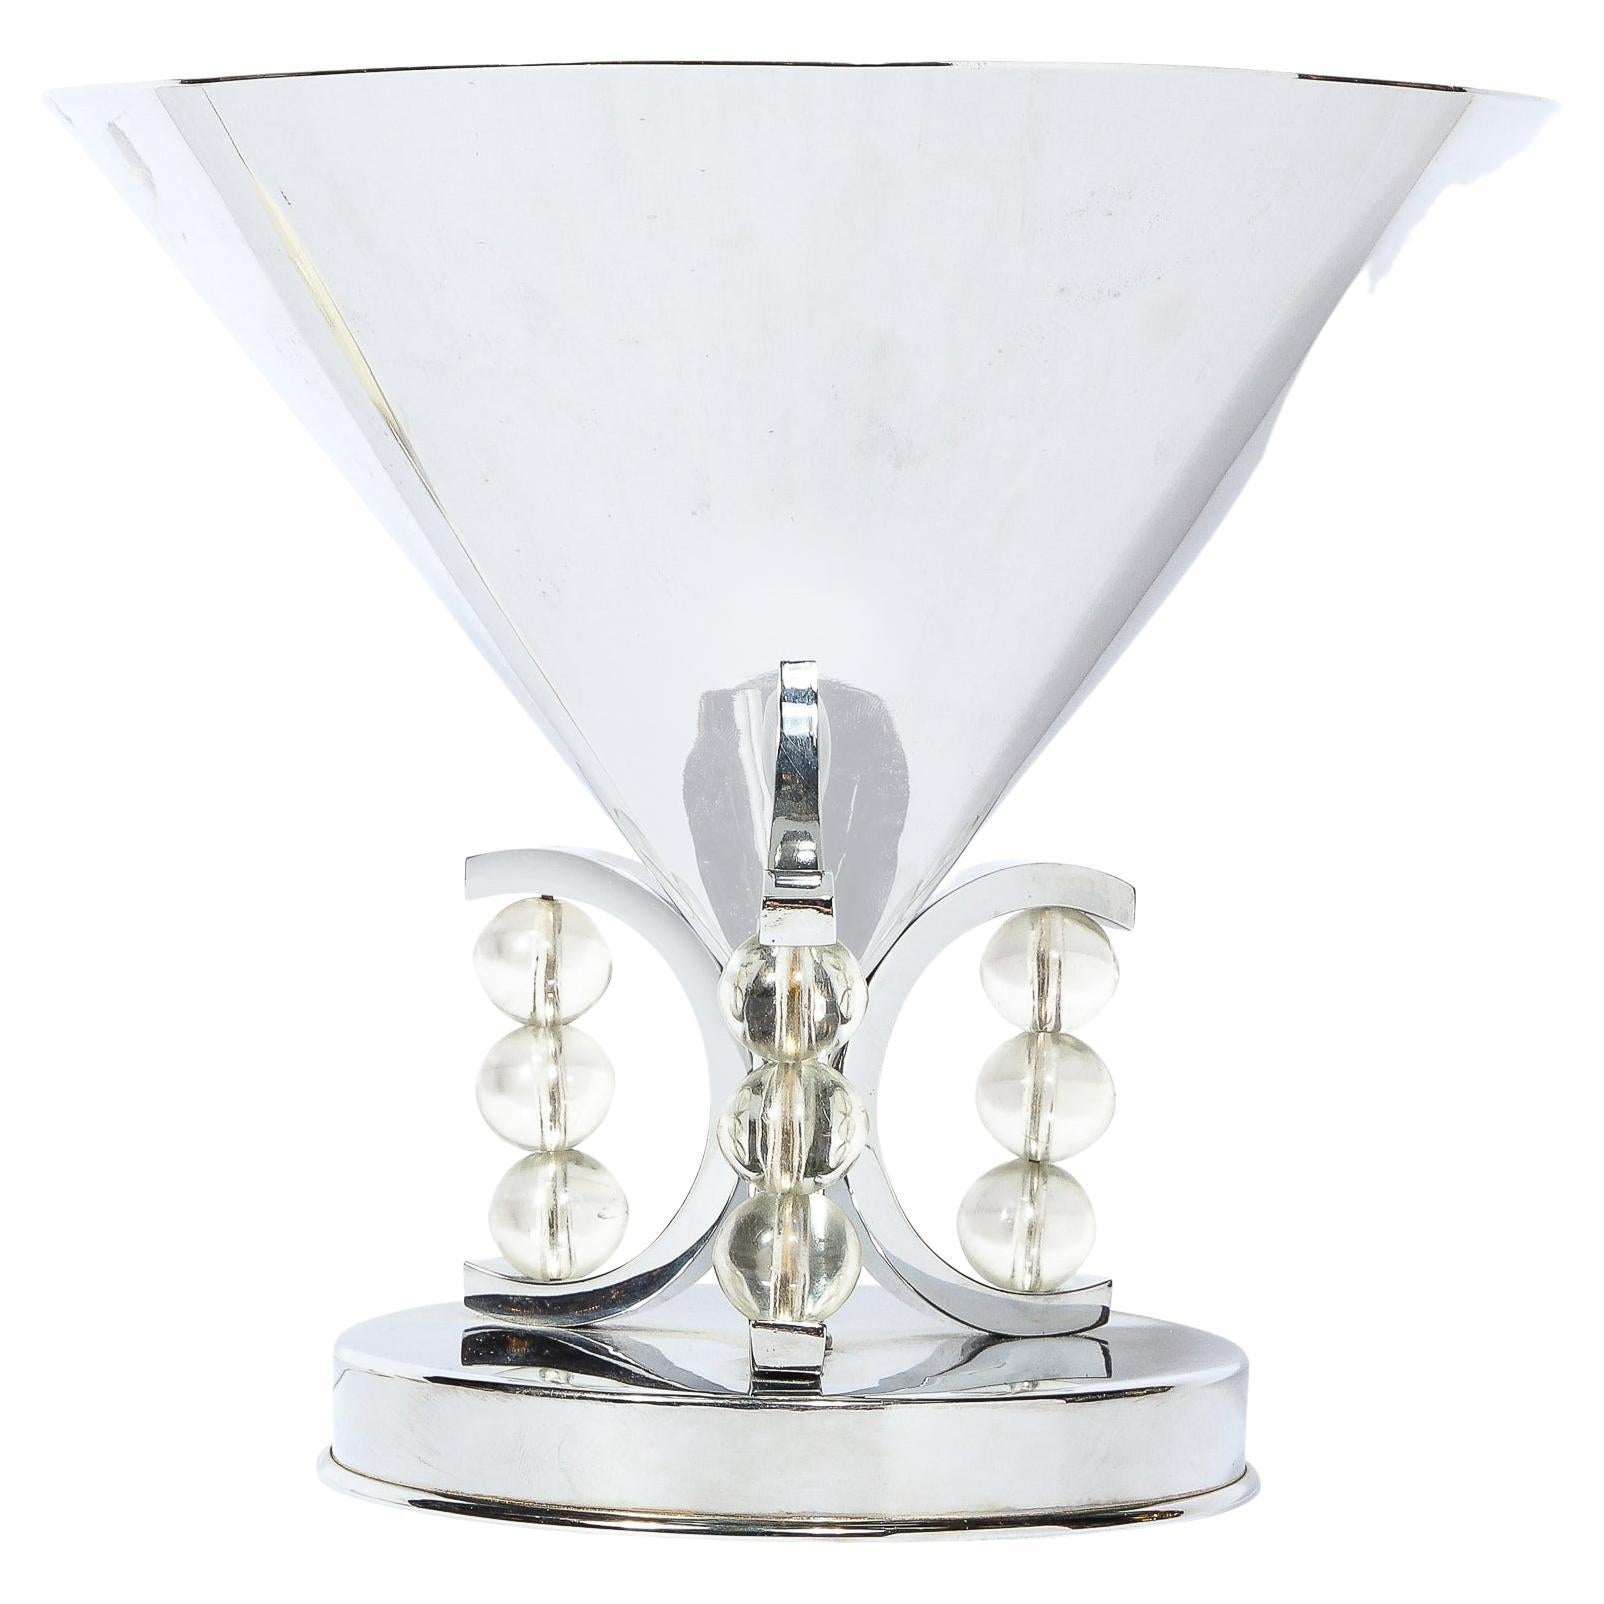 Art Deco Conical Uplight Table Lamp in Chrome with Stacked Glass Ball Detailing For Sale